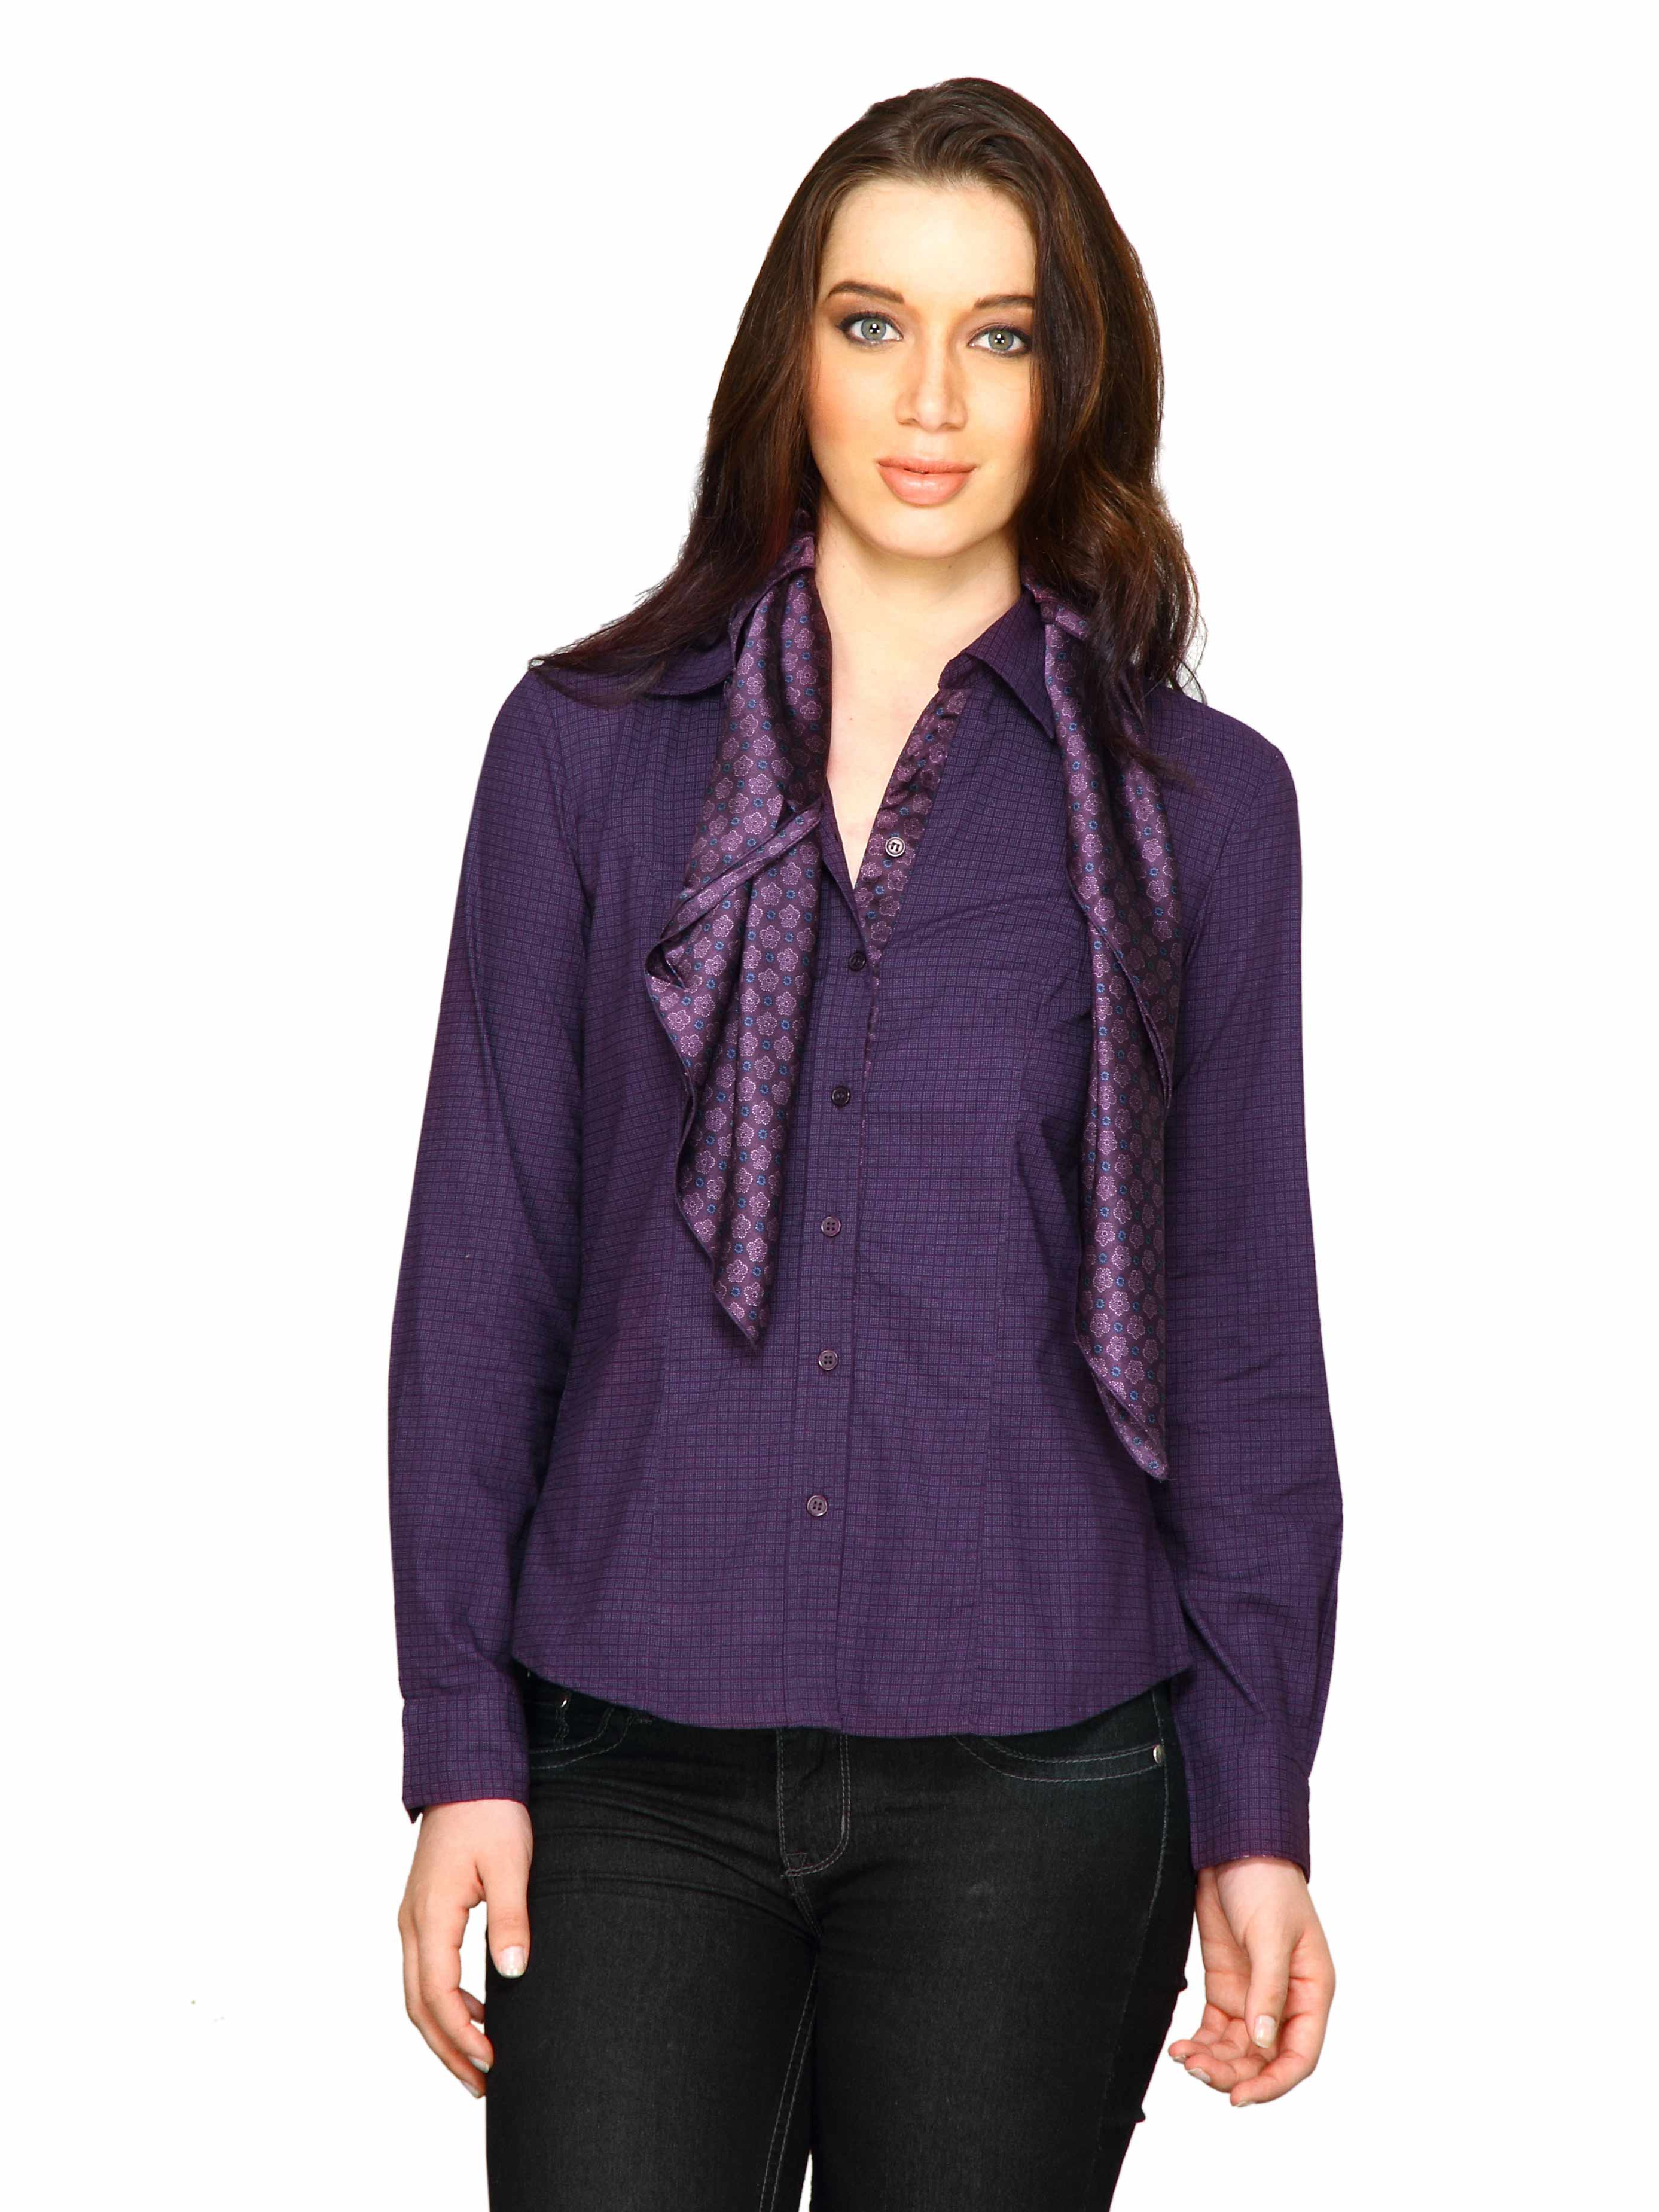 Scullers For Her Women Scarf Shirt Purple Tops